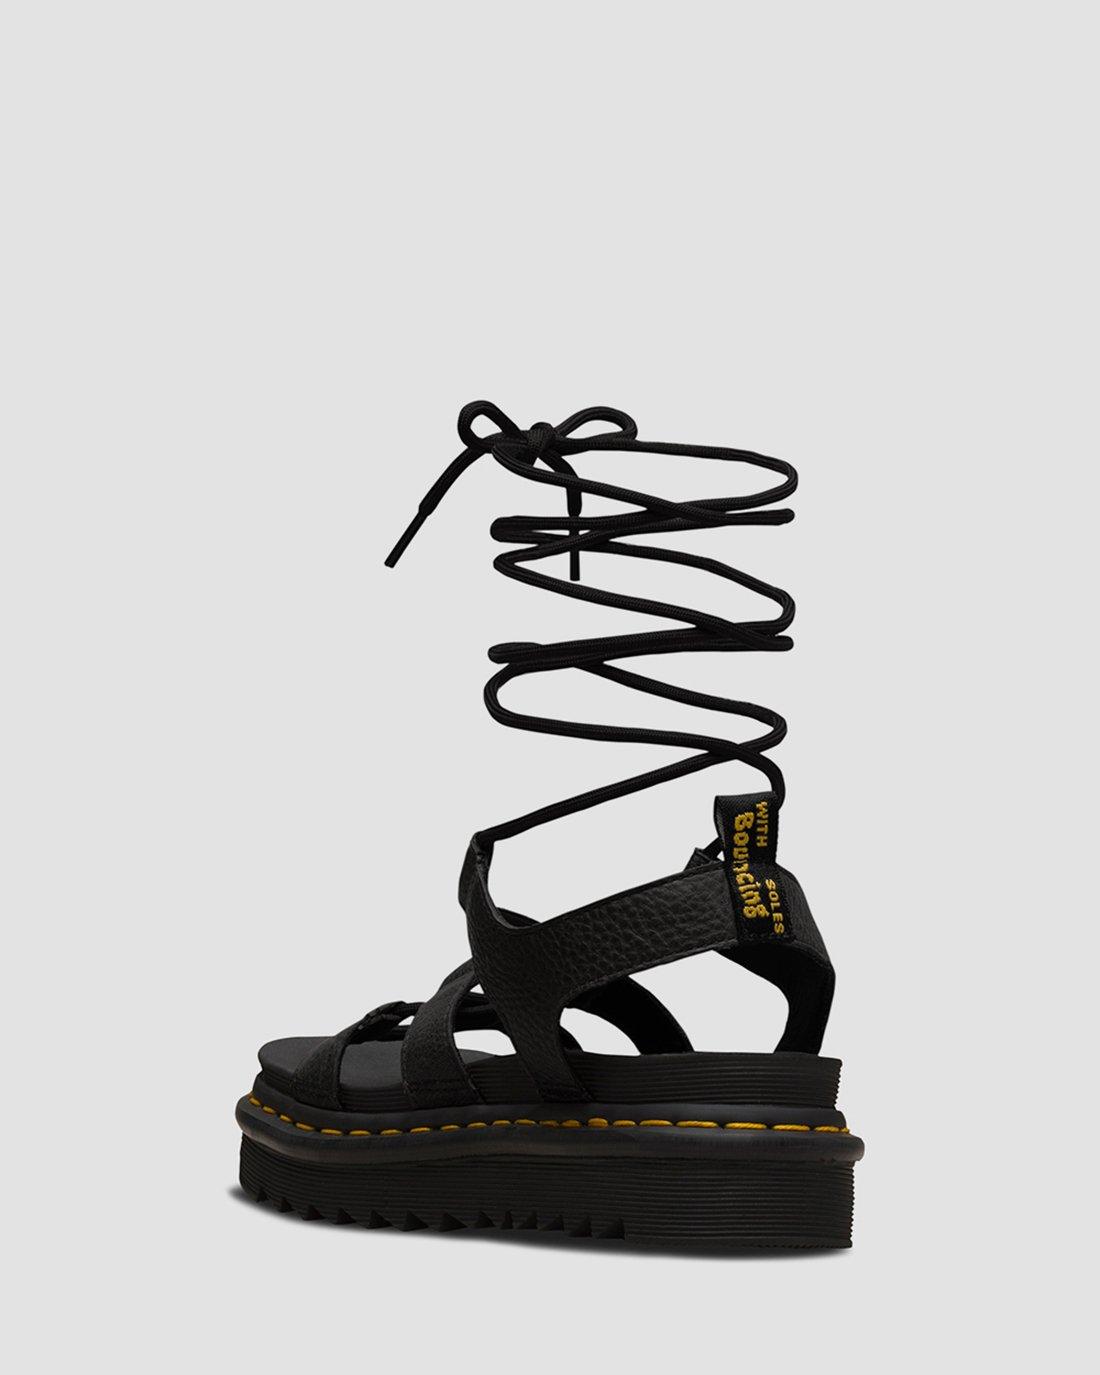 Dr.Martens Womens Nartilla Grizzly Leather Sandals